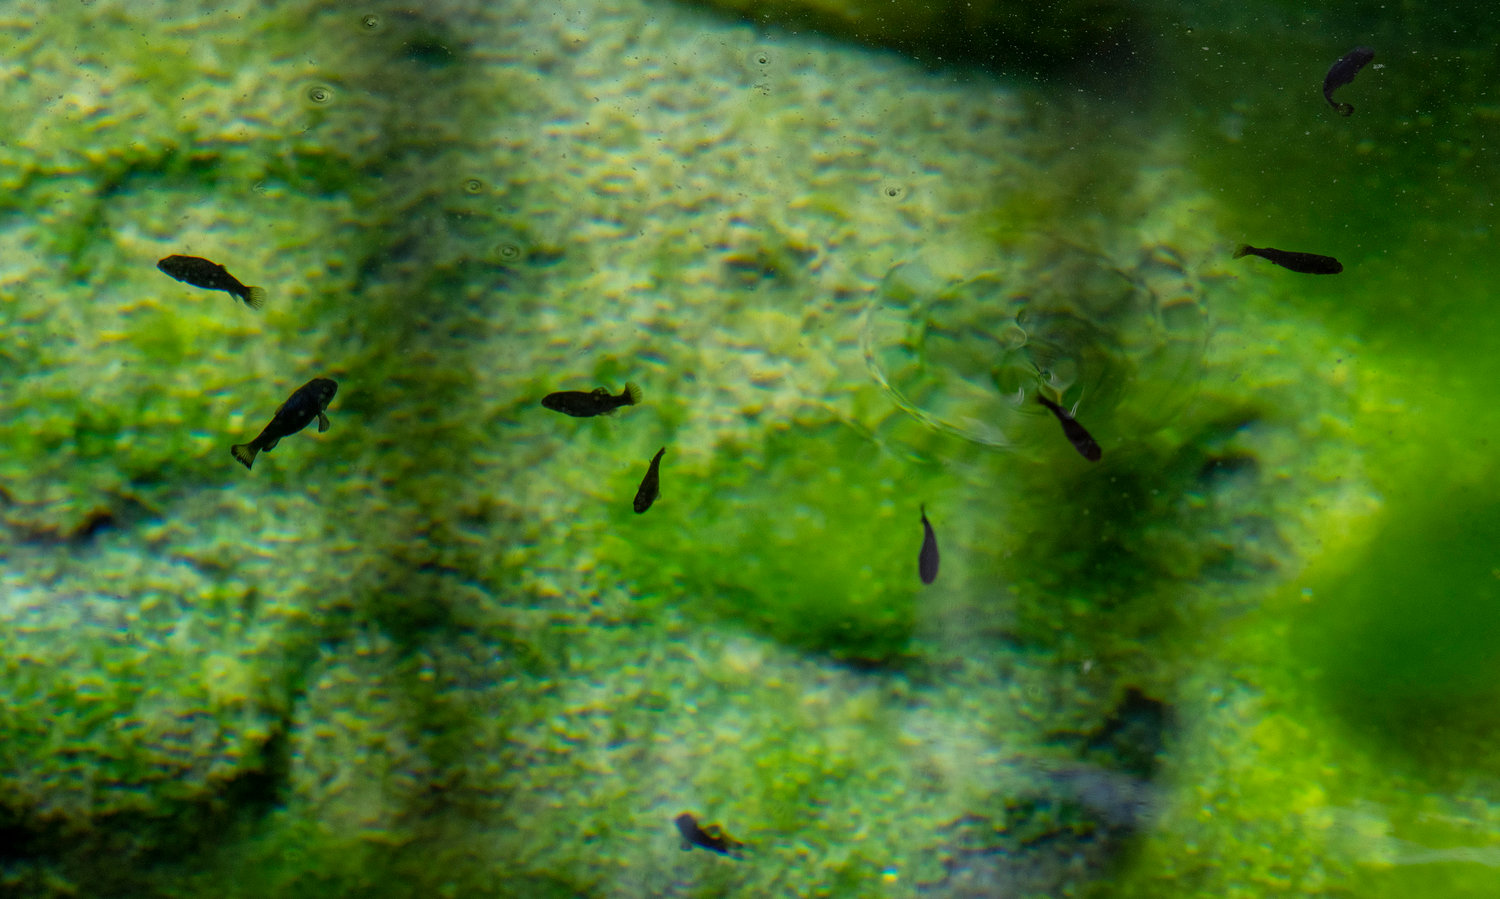 Devil's Hole pupfish swim in a specially designed tank, which mimics their natural environment at the Ash Meadows Fish Conservation Facility, Friday, April 29, 2022, in Ash Meadows National Wildlife Refuge, Nevada. Federal biologists have reported increased numbers of one of the world's rarest fish, the Devil's Hole pupfish, counting 175, the most seen in a spring count 22 years. (Brian van der Brug/Los Angeles Times/TNS)